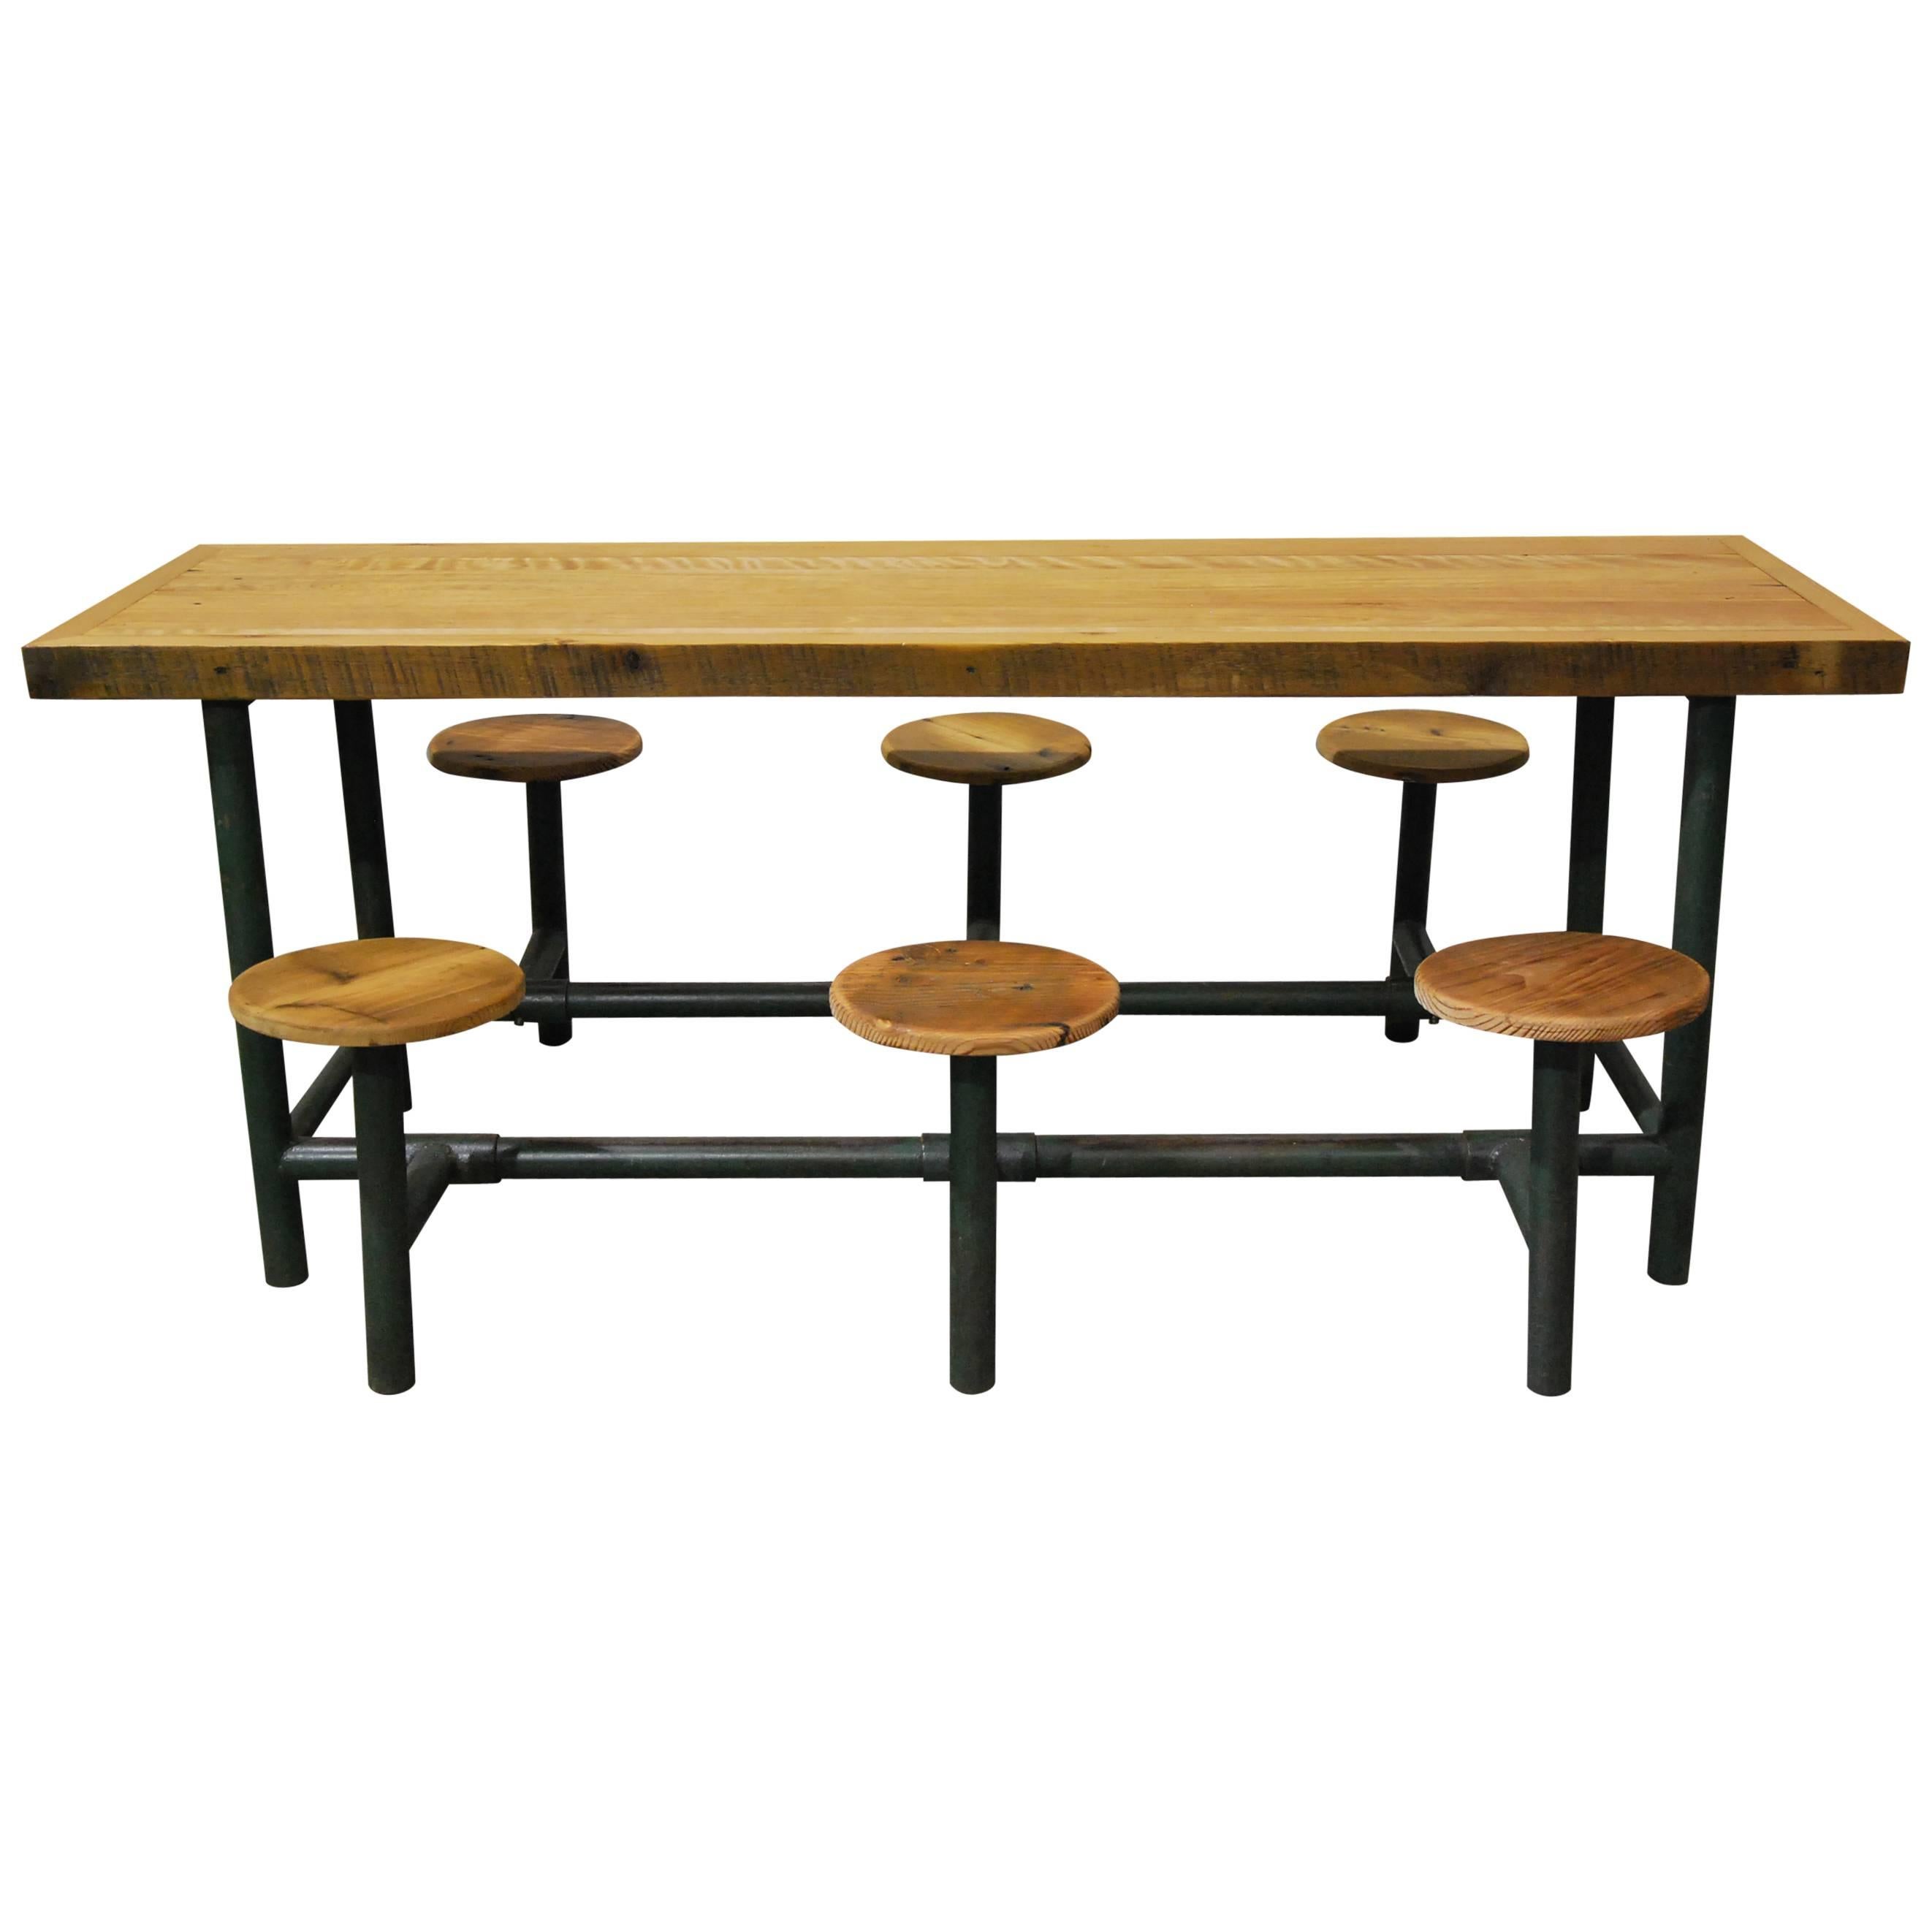 Factory Lunch Room Flip Table